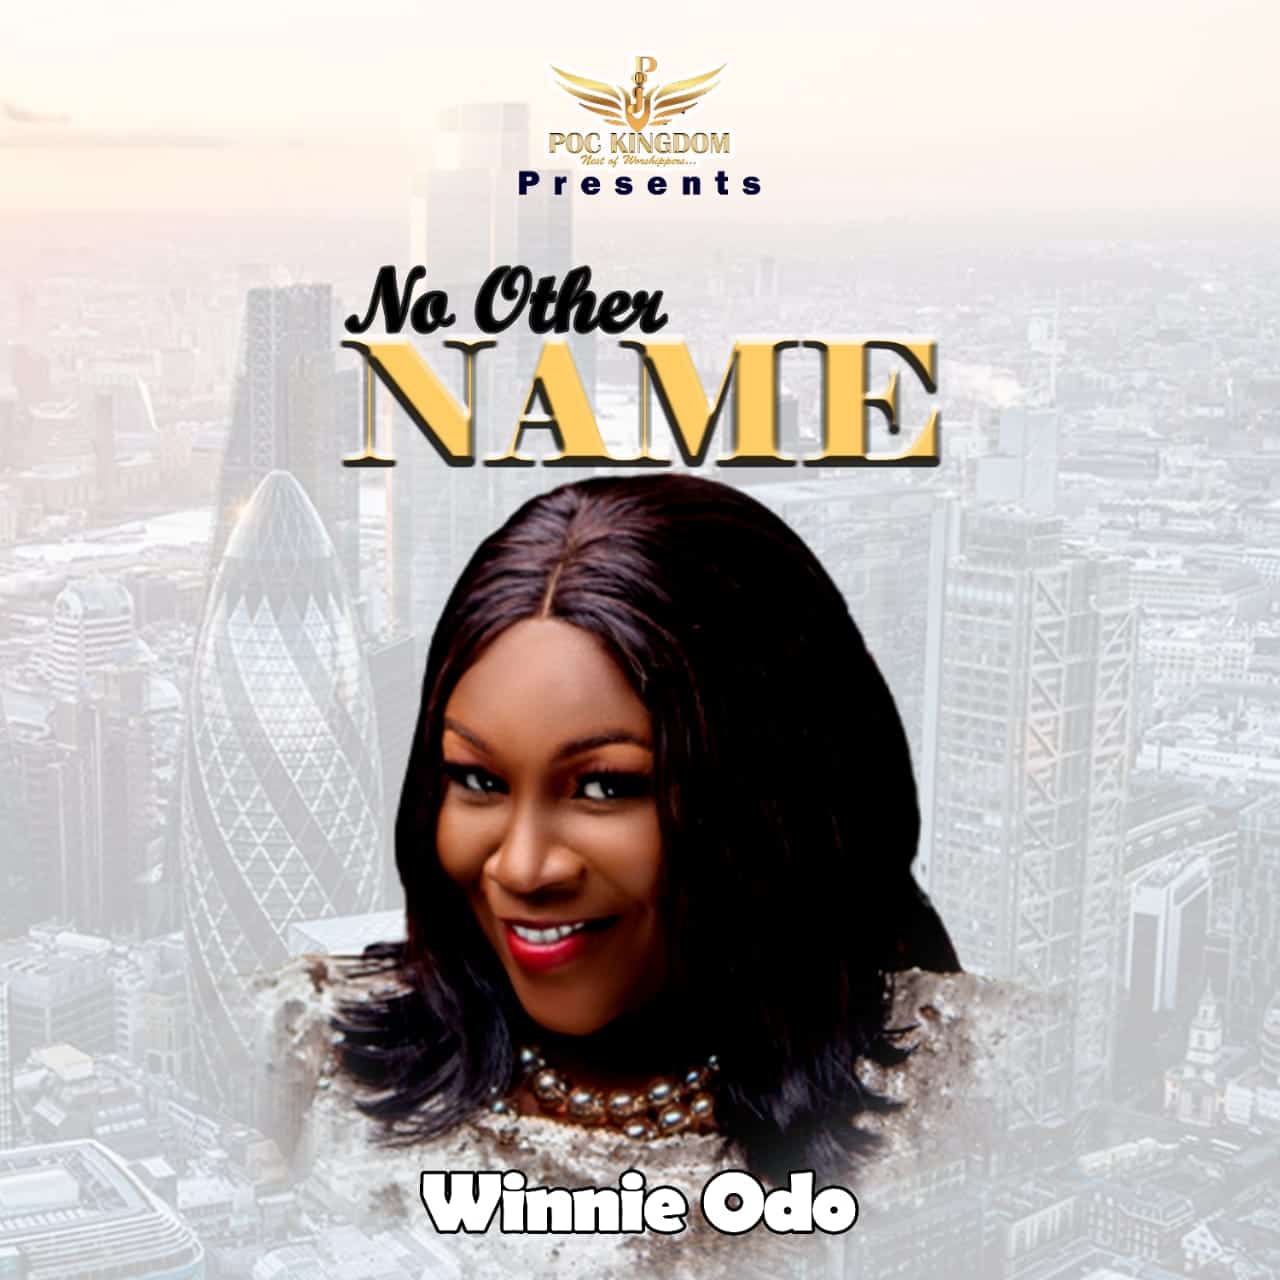 Download Mp3: Winnie Odo - No Other Name